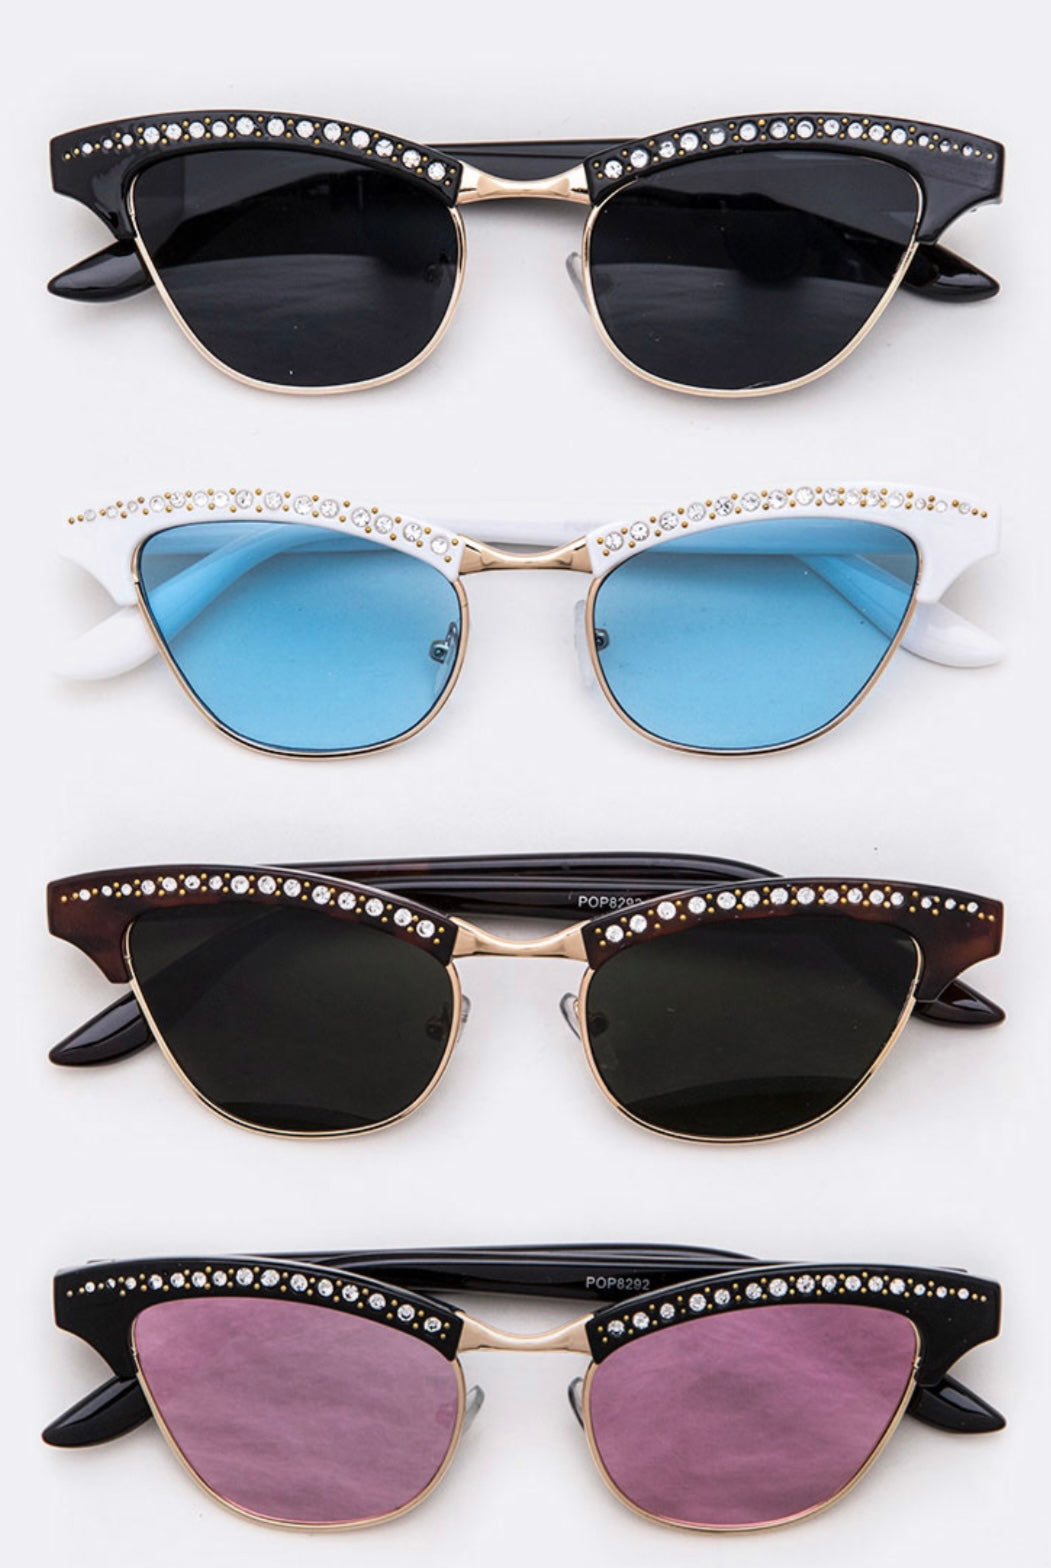 Bling Studded Cat Eye Sunglasses- More Styles Available!